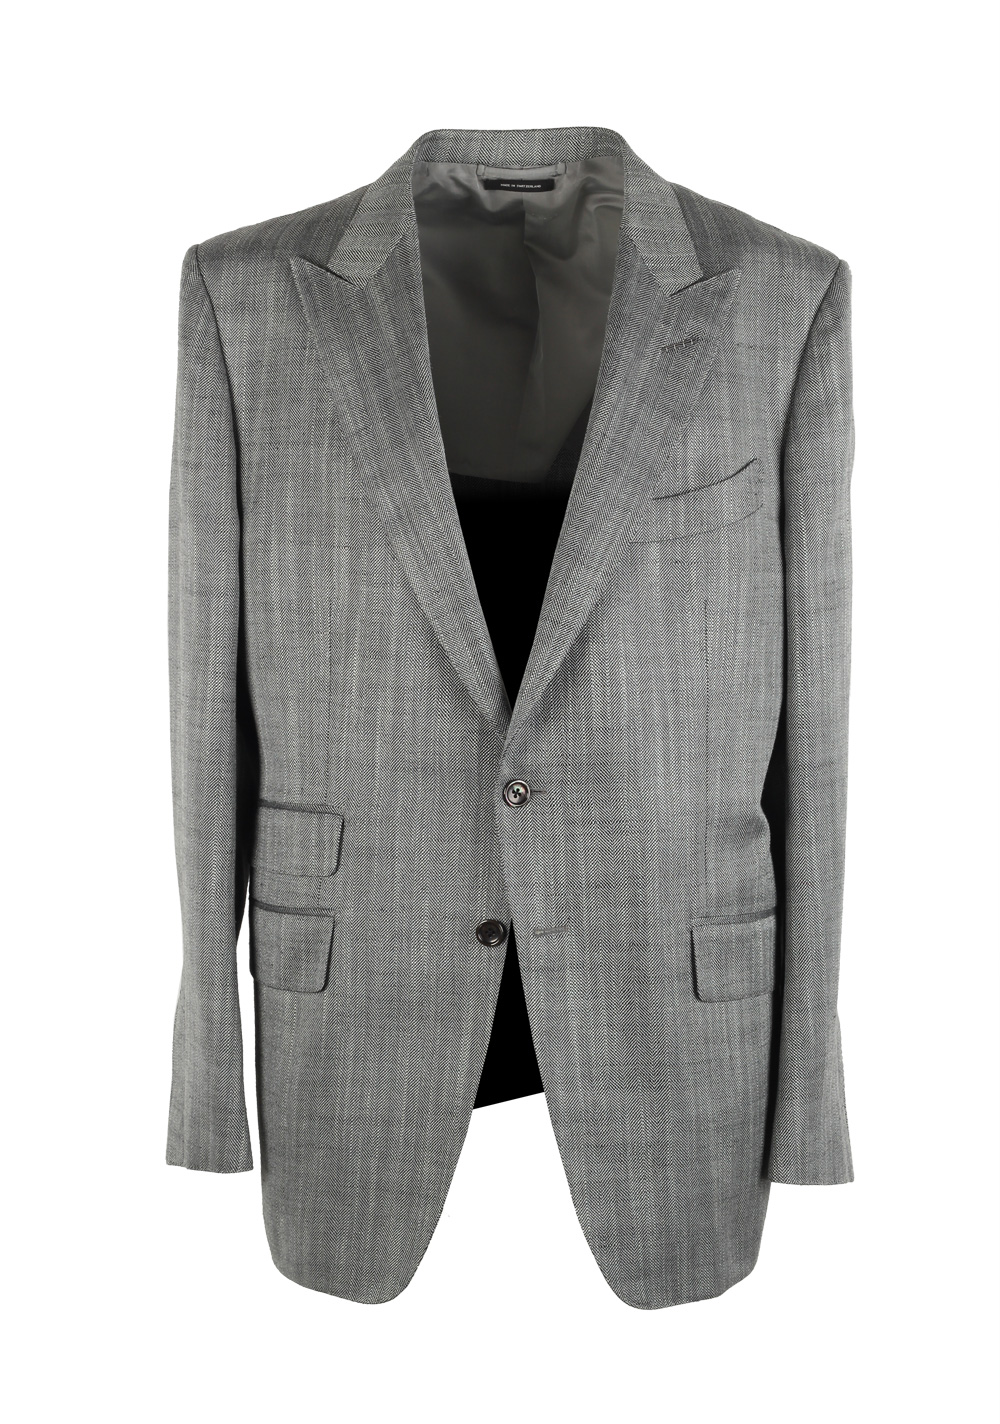 TOM FORD O’Connor Gray Sport Coat Size 56 / 46R U.S. Silk Mohair Fit Y ...